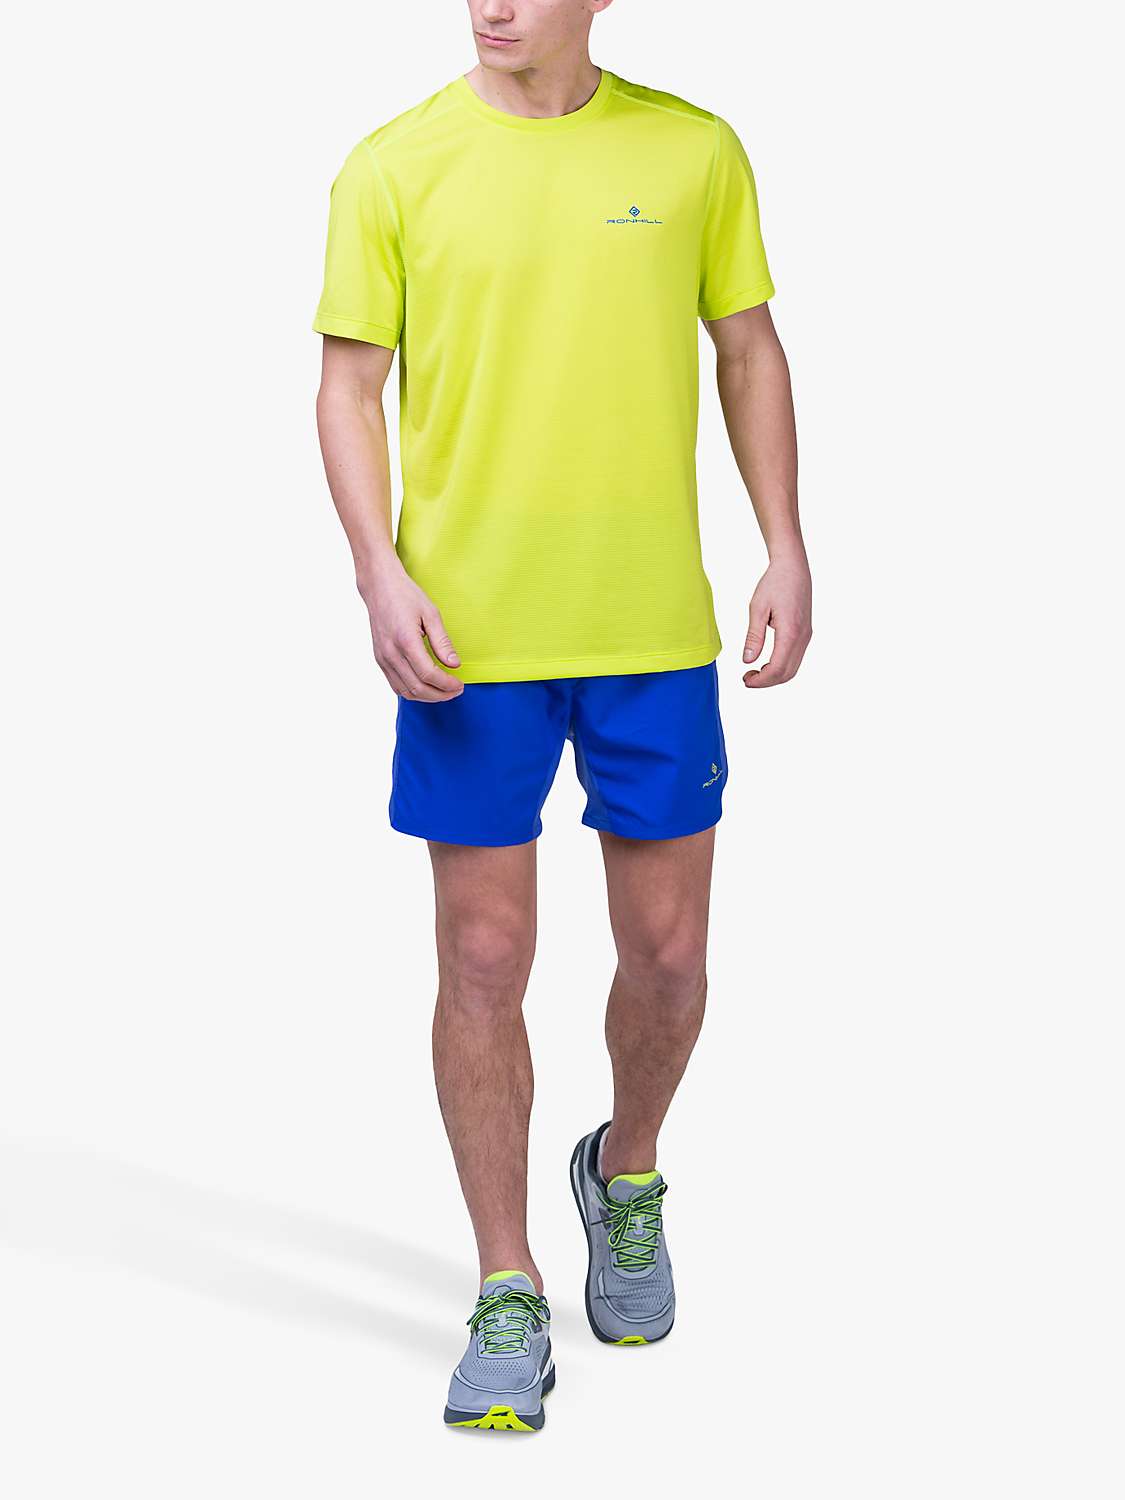 Buy Ronhill Sports Top, Yellow Online at johnlewis.com